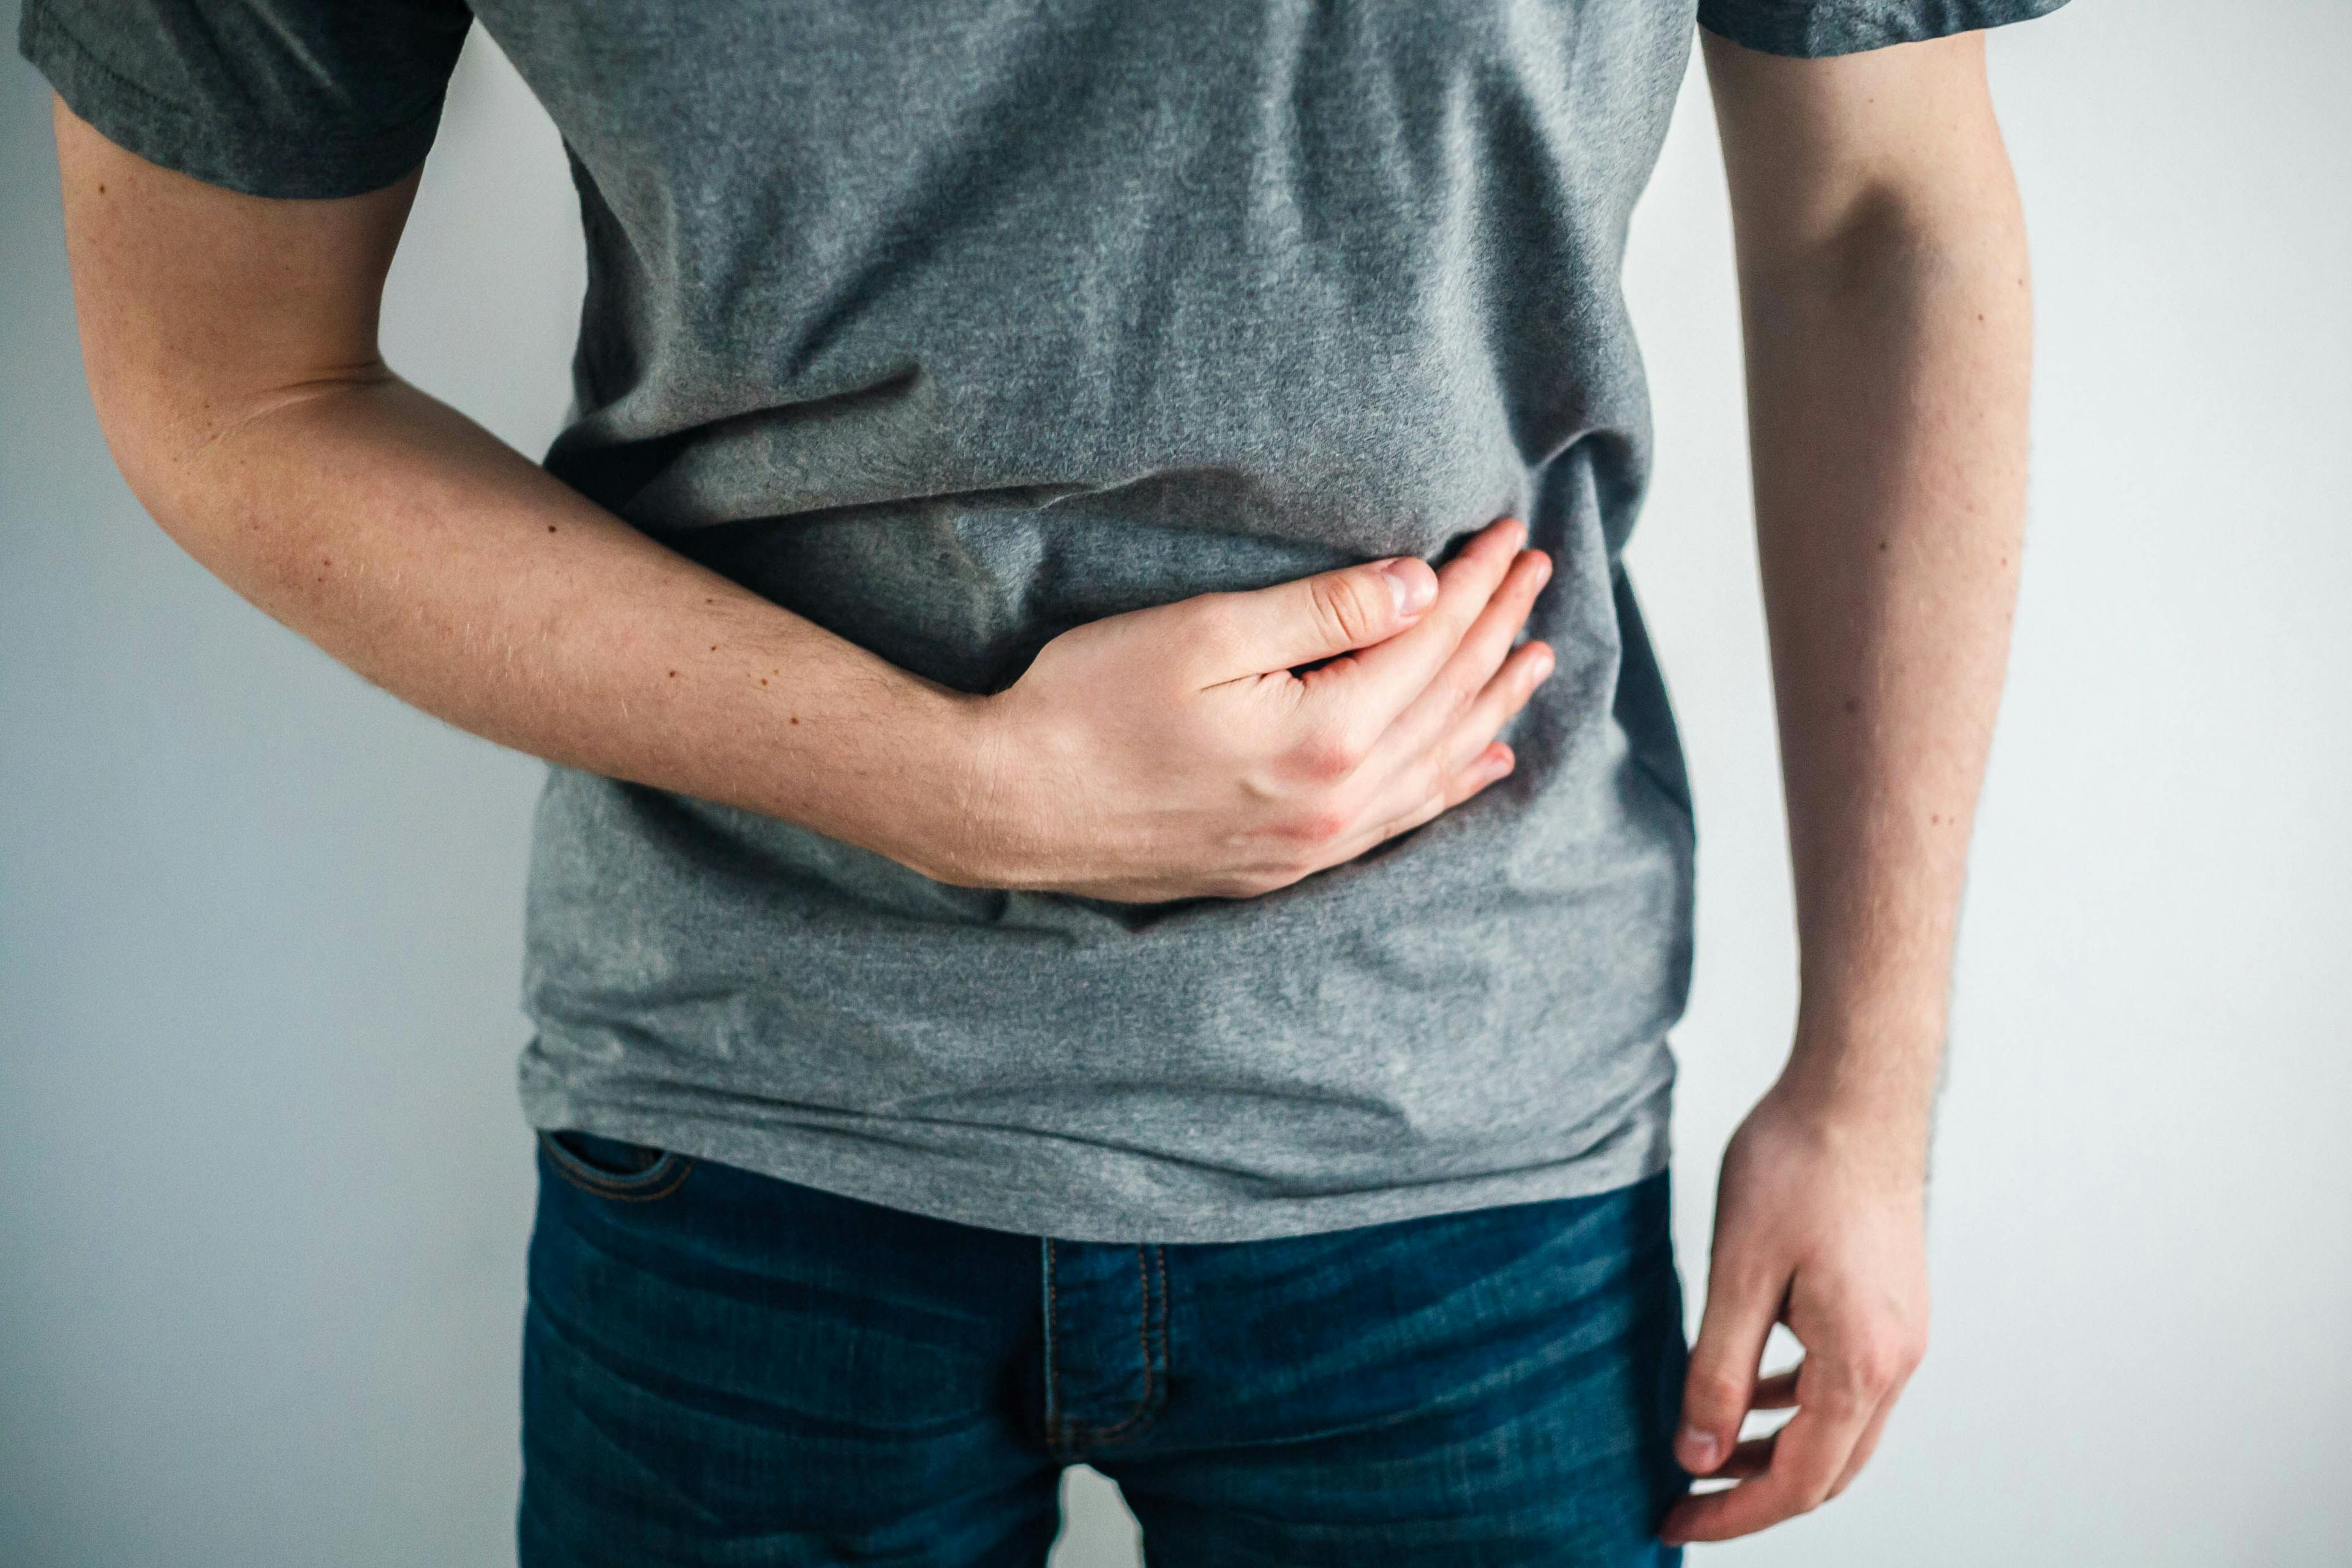 Inflammatory Bowel Disease May Cause Erectile Dysfunction, Study Finds